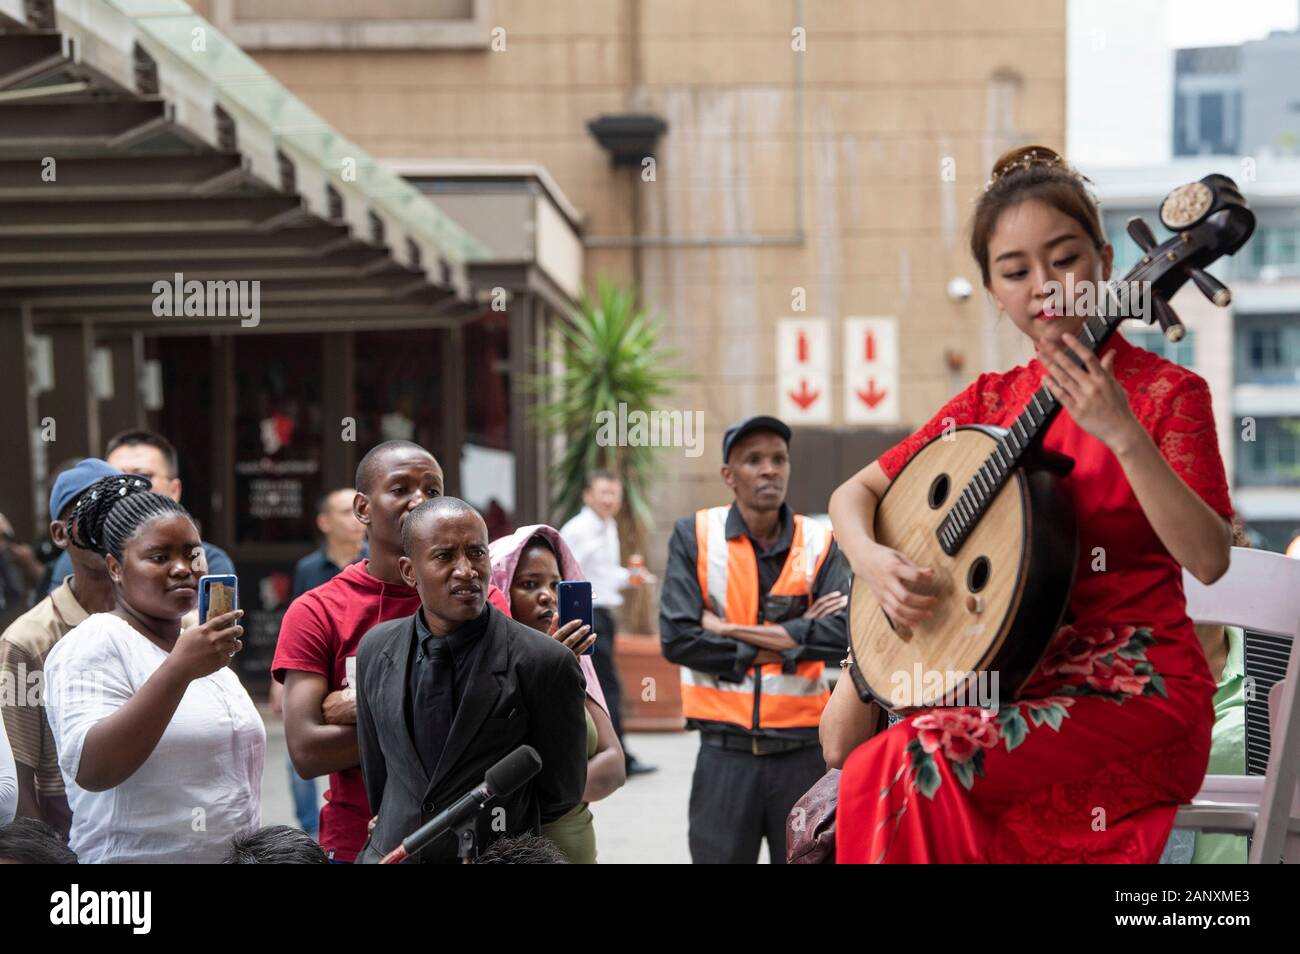 Johannesburg, South Africa. 19th Jan, 2020. A Chinese artist performs during celebrations for the upcoming Chinese Lunar New Year in Johannesburg, South Africa, Jan. 19, 2020. Hundreds of Chinese and South Africans of all ages from different backgrounds gathered together at Nelson Mandela Square in Johannesburg on Sunday to celebrate Chinese Lunar New Year. A number of performers based both in China and South Africa entertained the attendees with music and dance. Credit: Chen Cheng/Xinhua/Alamy Live News Stock Photo